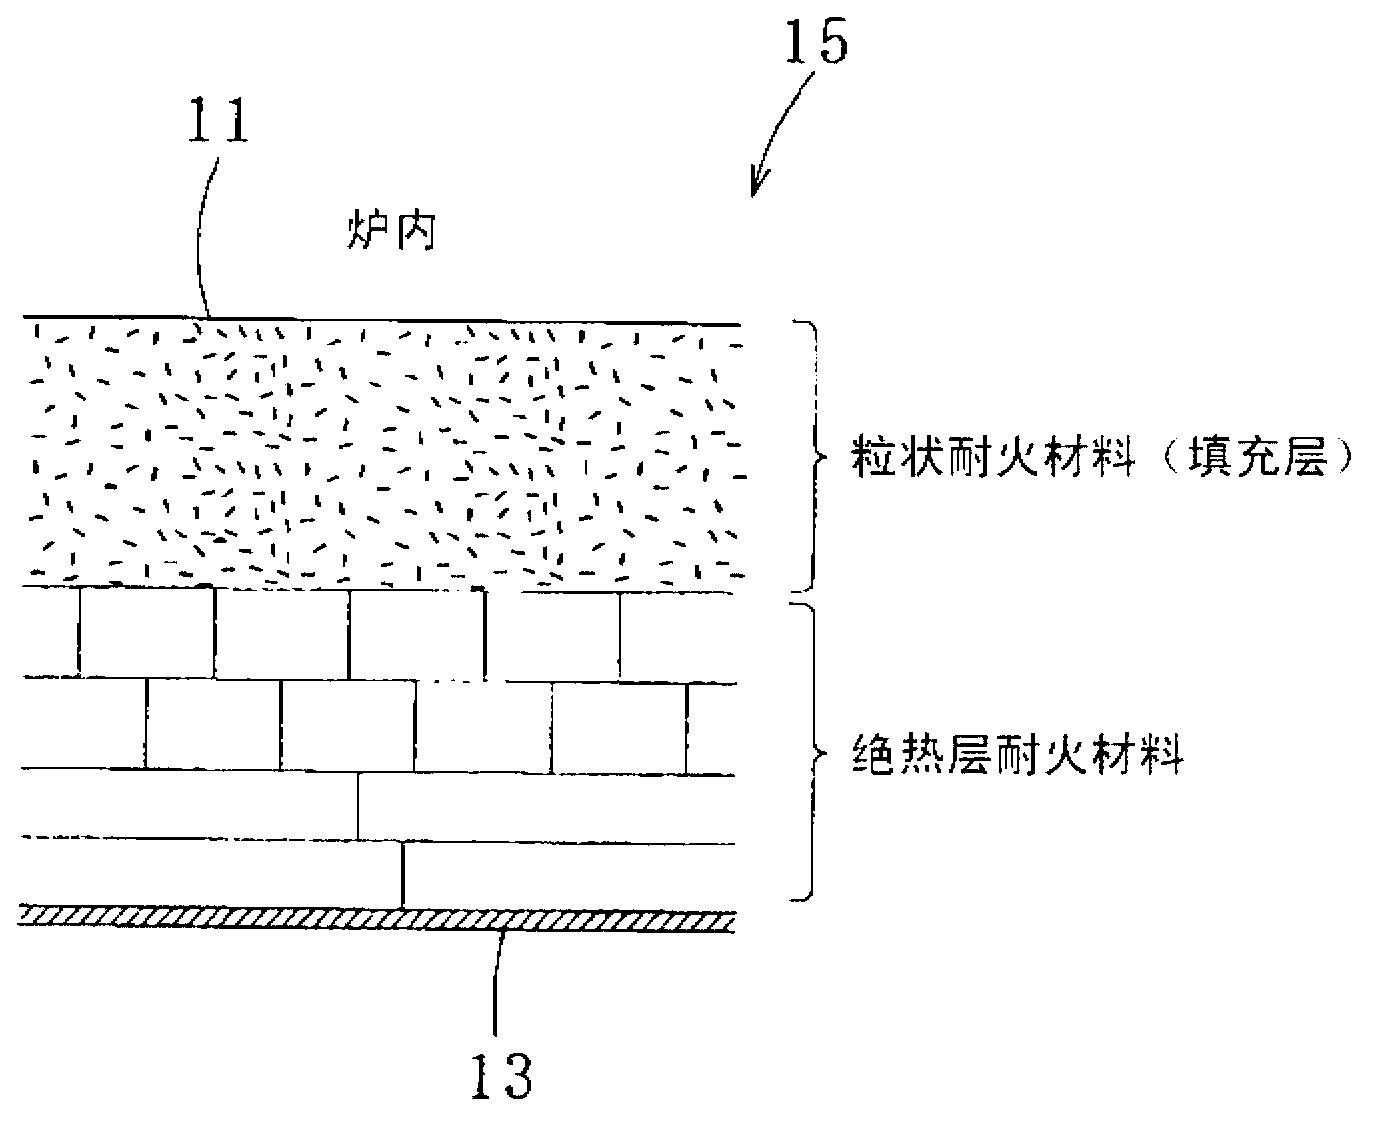 Heat treatment furnace for metal chunk, method for repairing heat treatment furnace for metal chunk, and method for producing infill for hearth used for heat treatment furnace for metal chunk